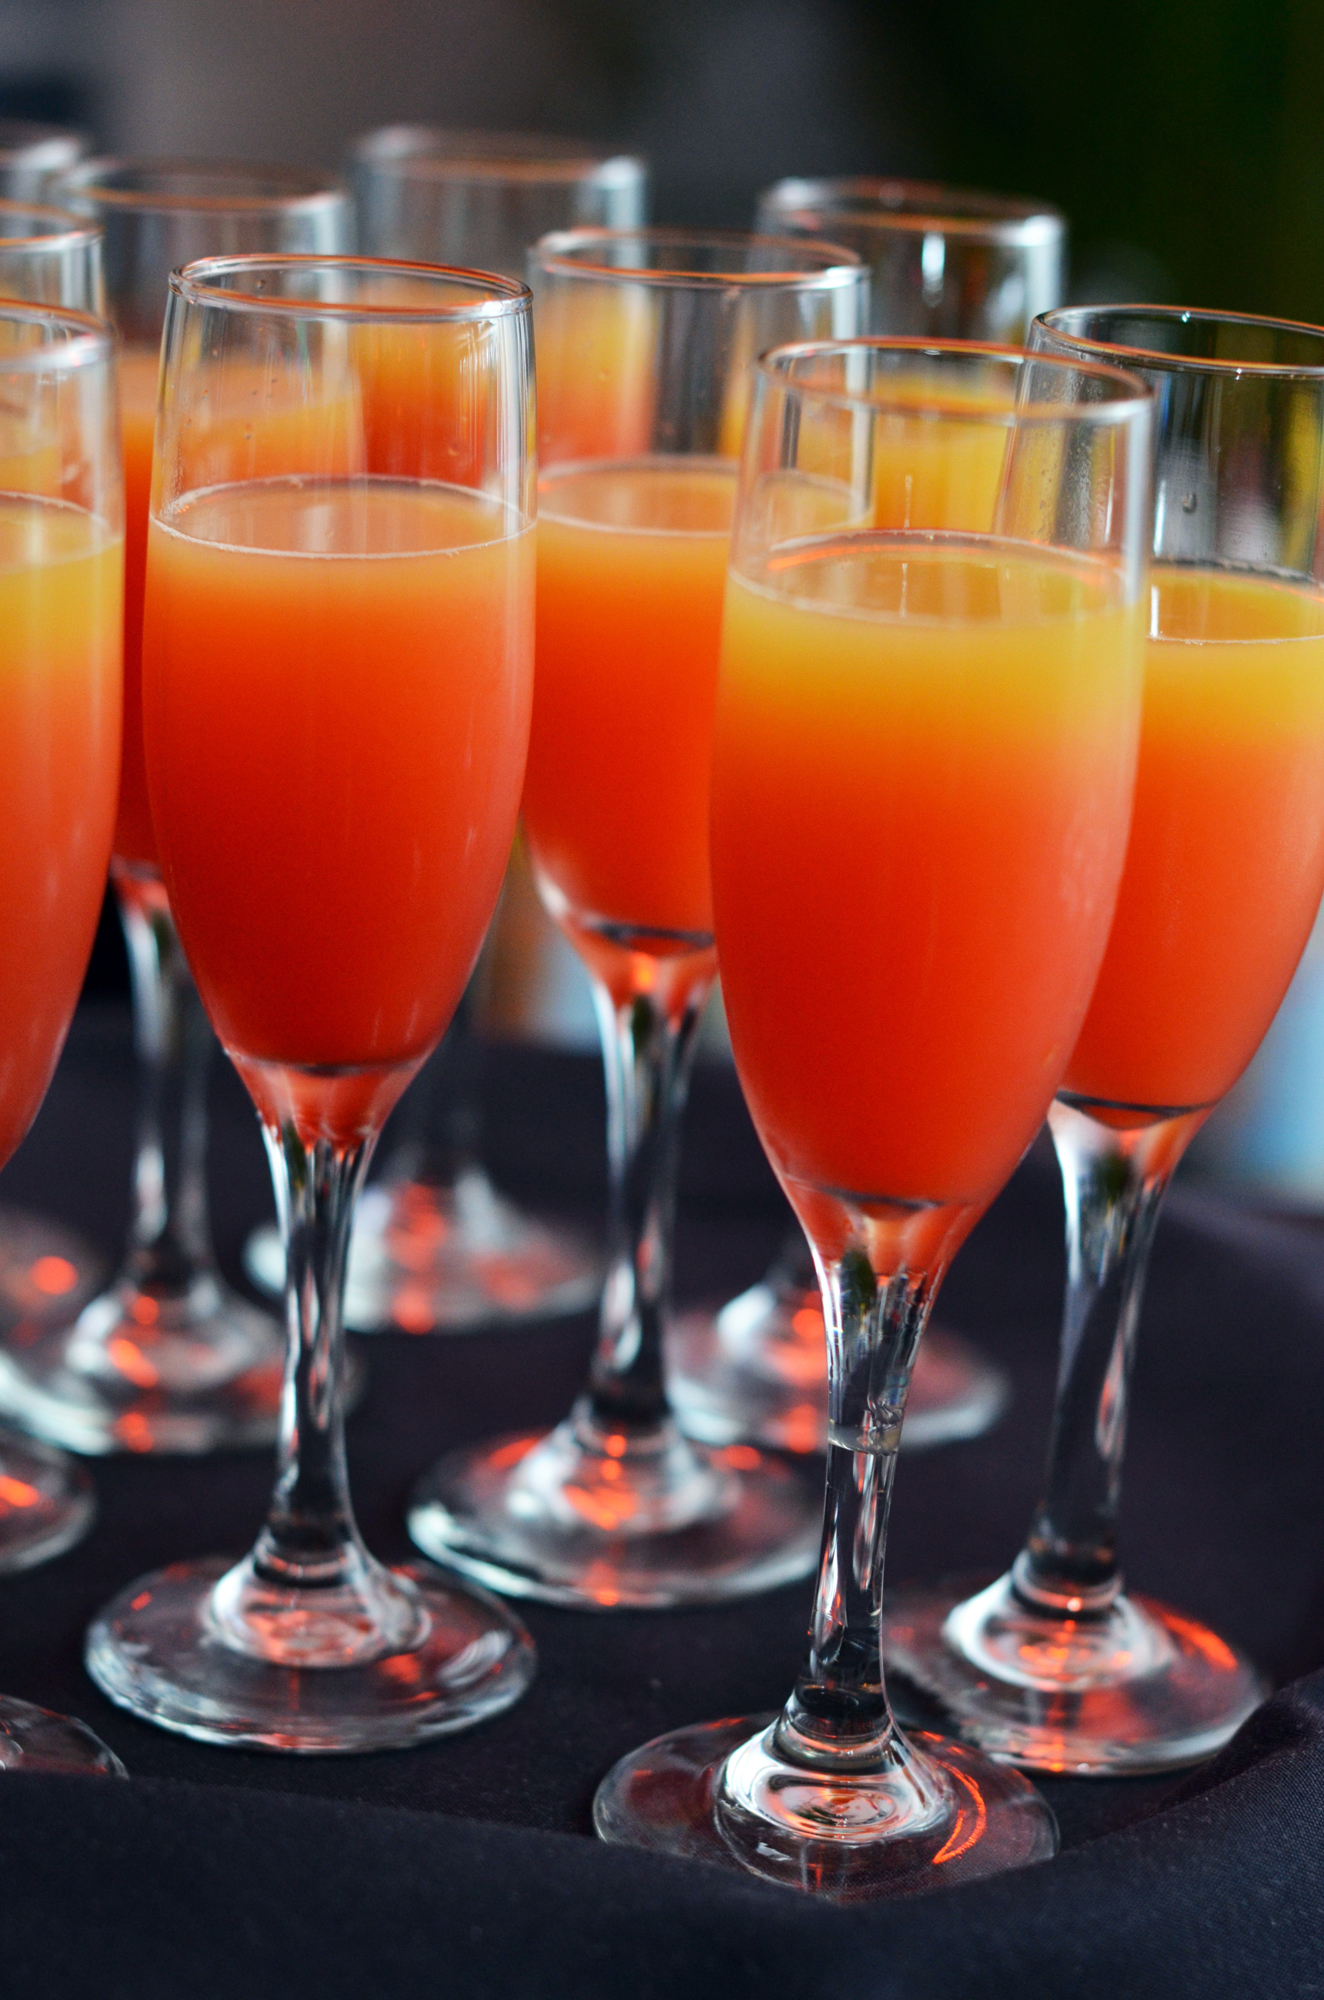 'Champagne Sunrise' was the signature drink at Palm Ball on Saturday, Feb. 6, at Bay Preserve. Photo by Heather Merriman Saba.